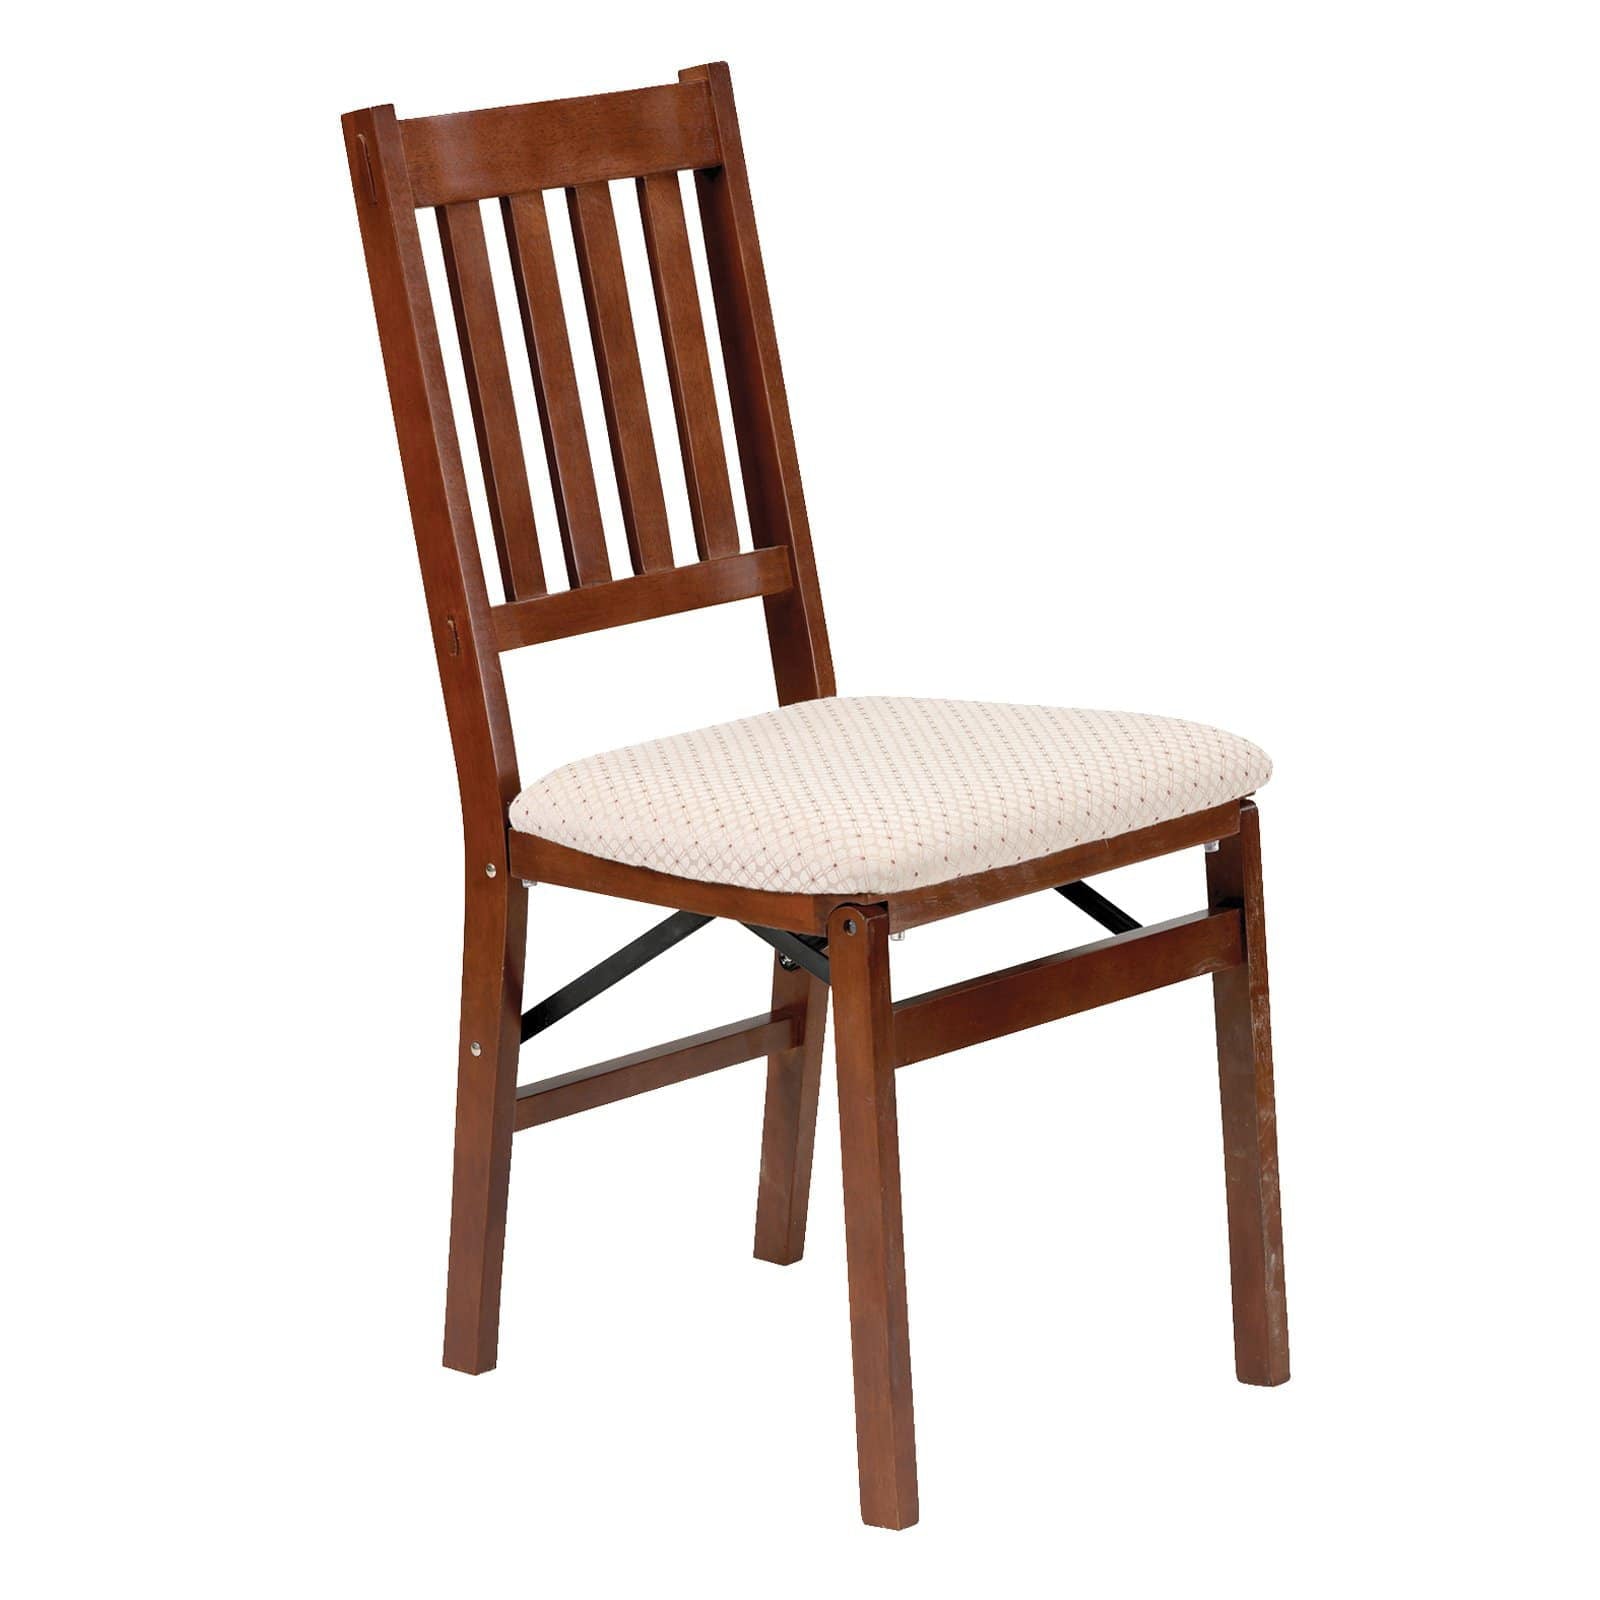 Arts and Craft Harwood folding chair with blush upholstery - Light Cherry